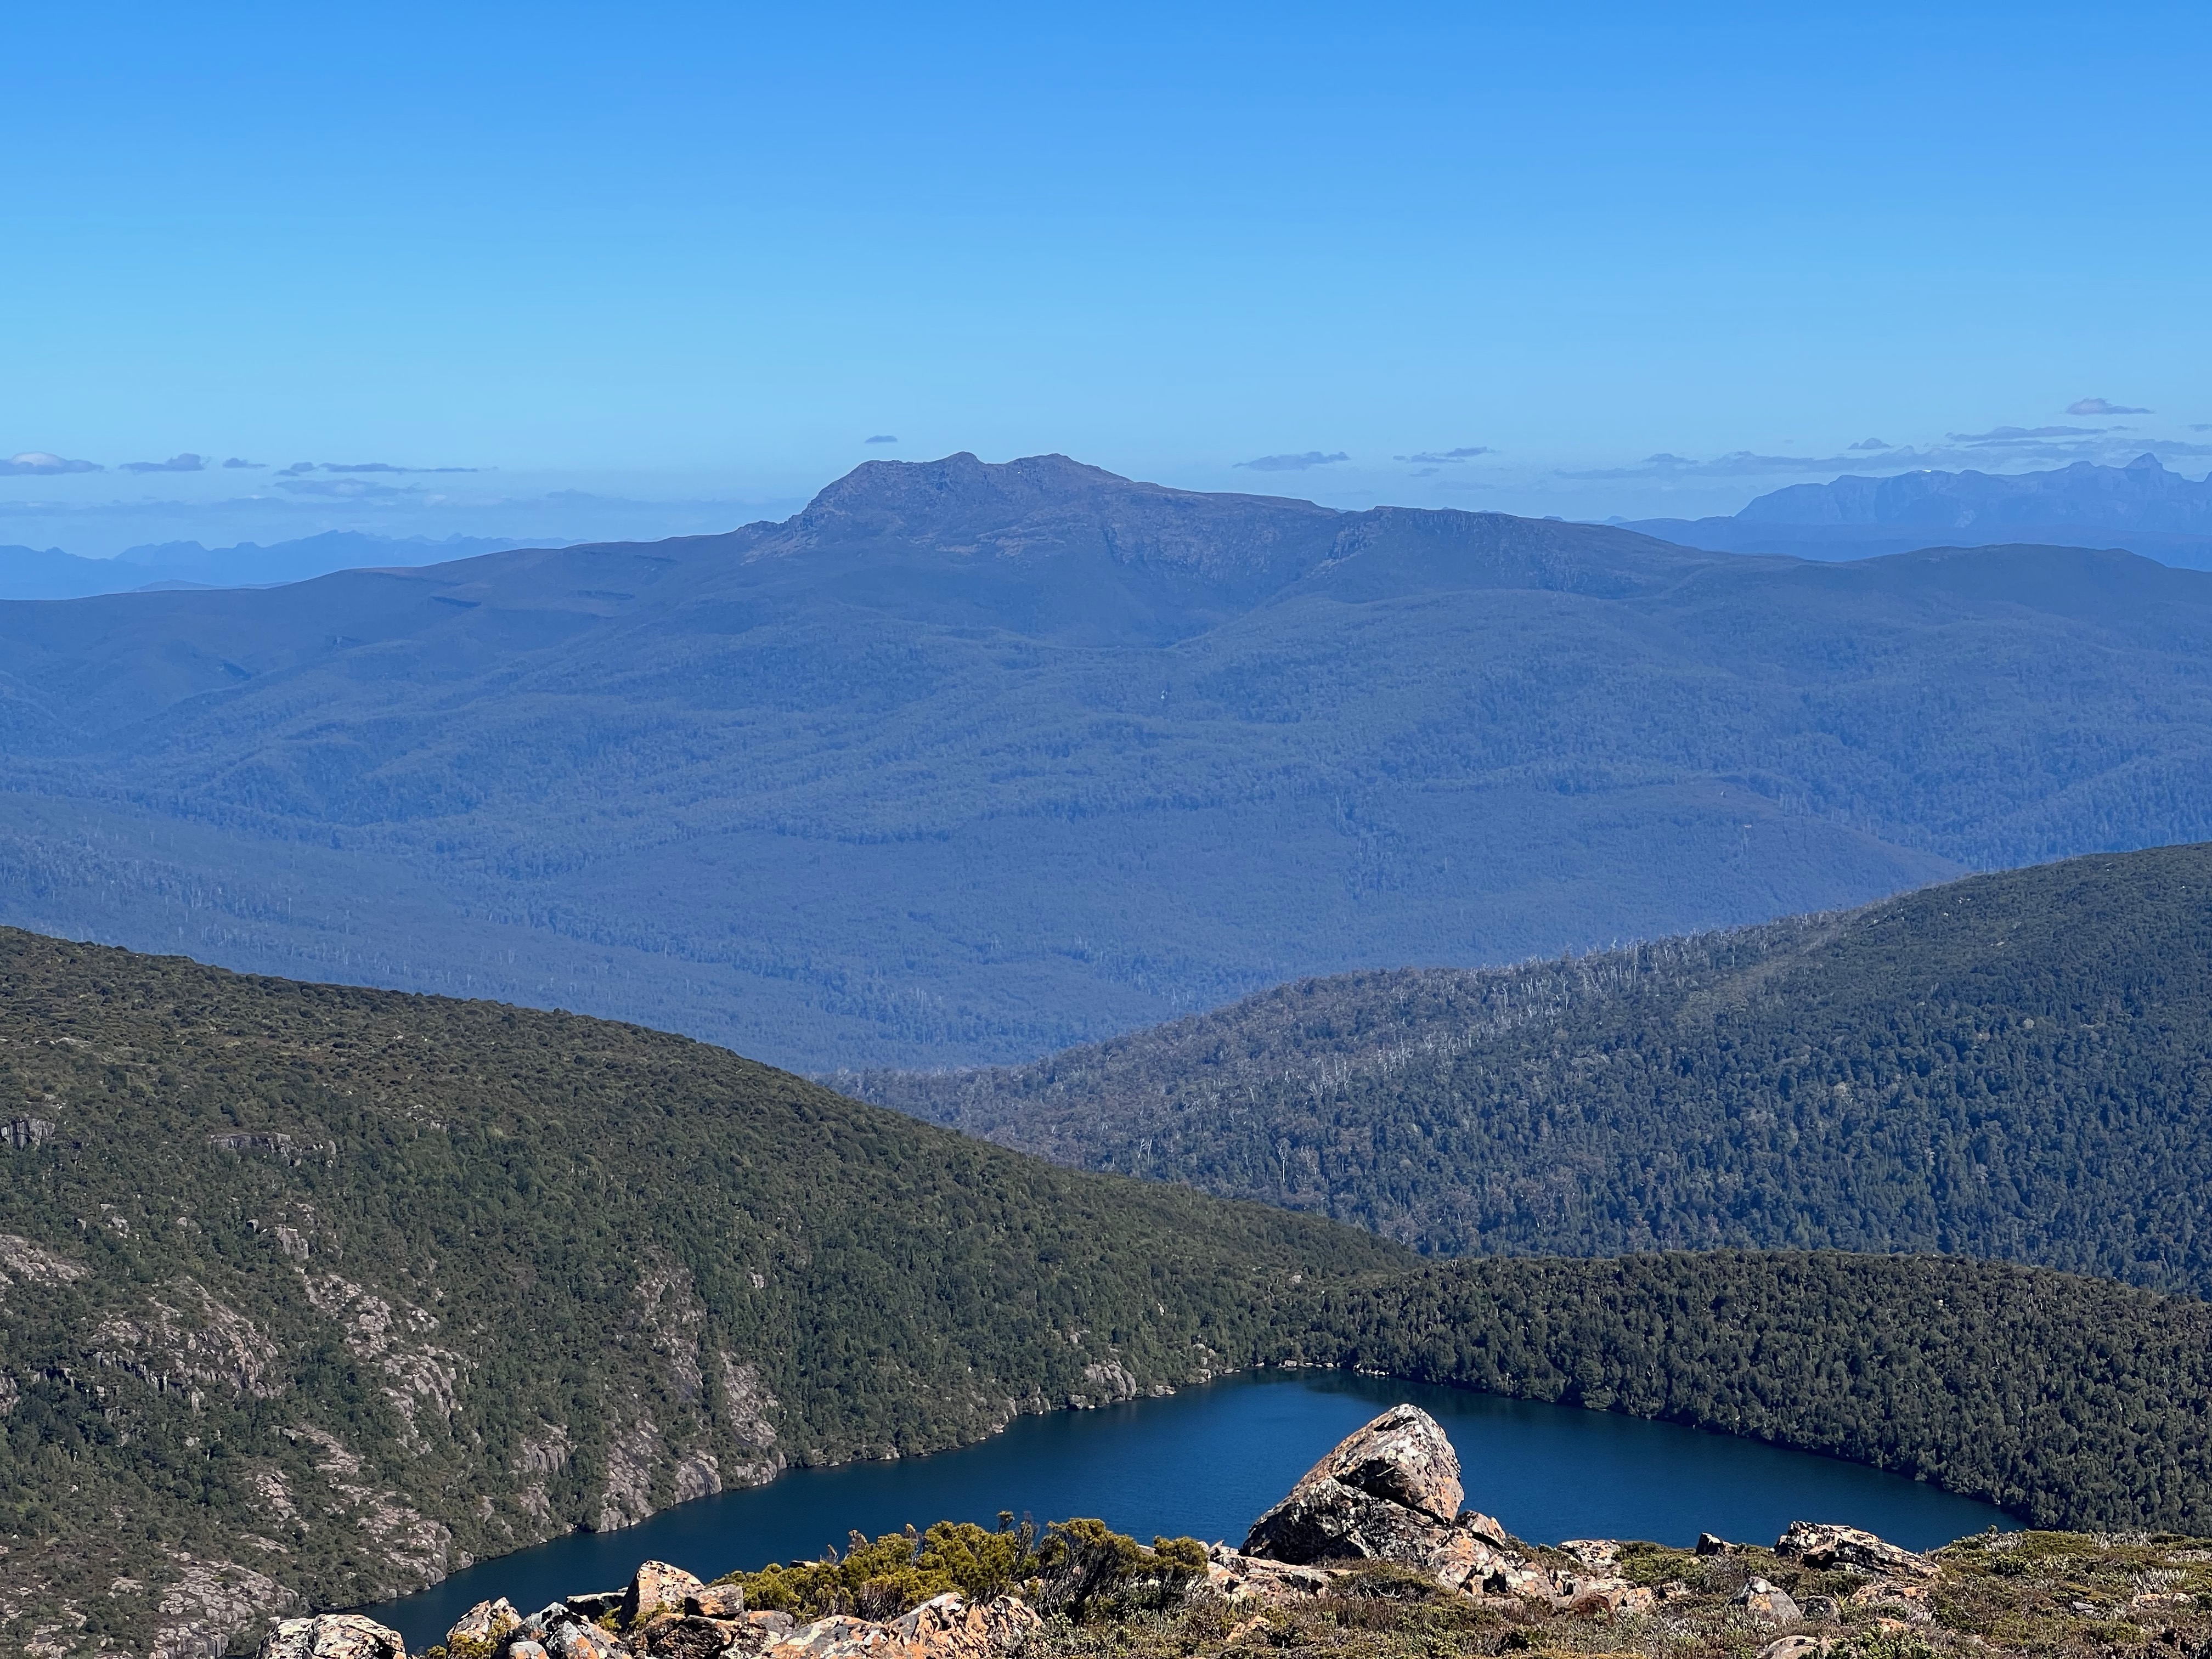 Mount Picton in the distance